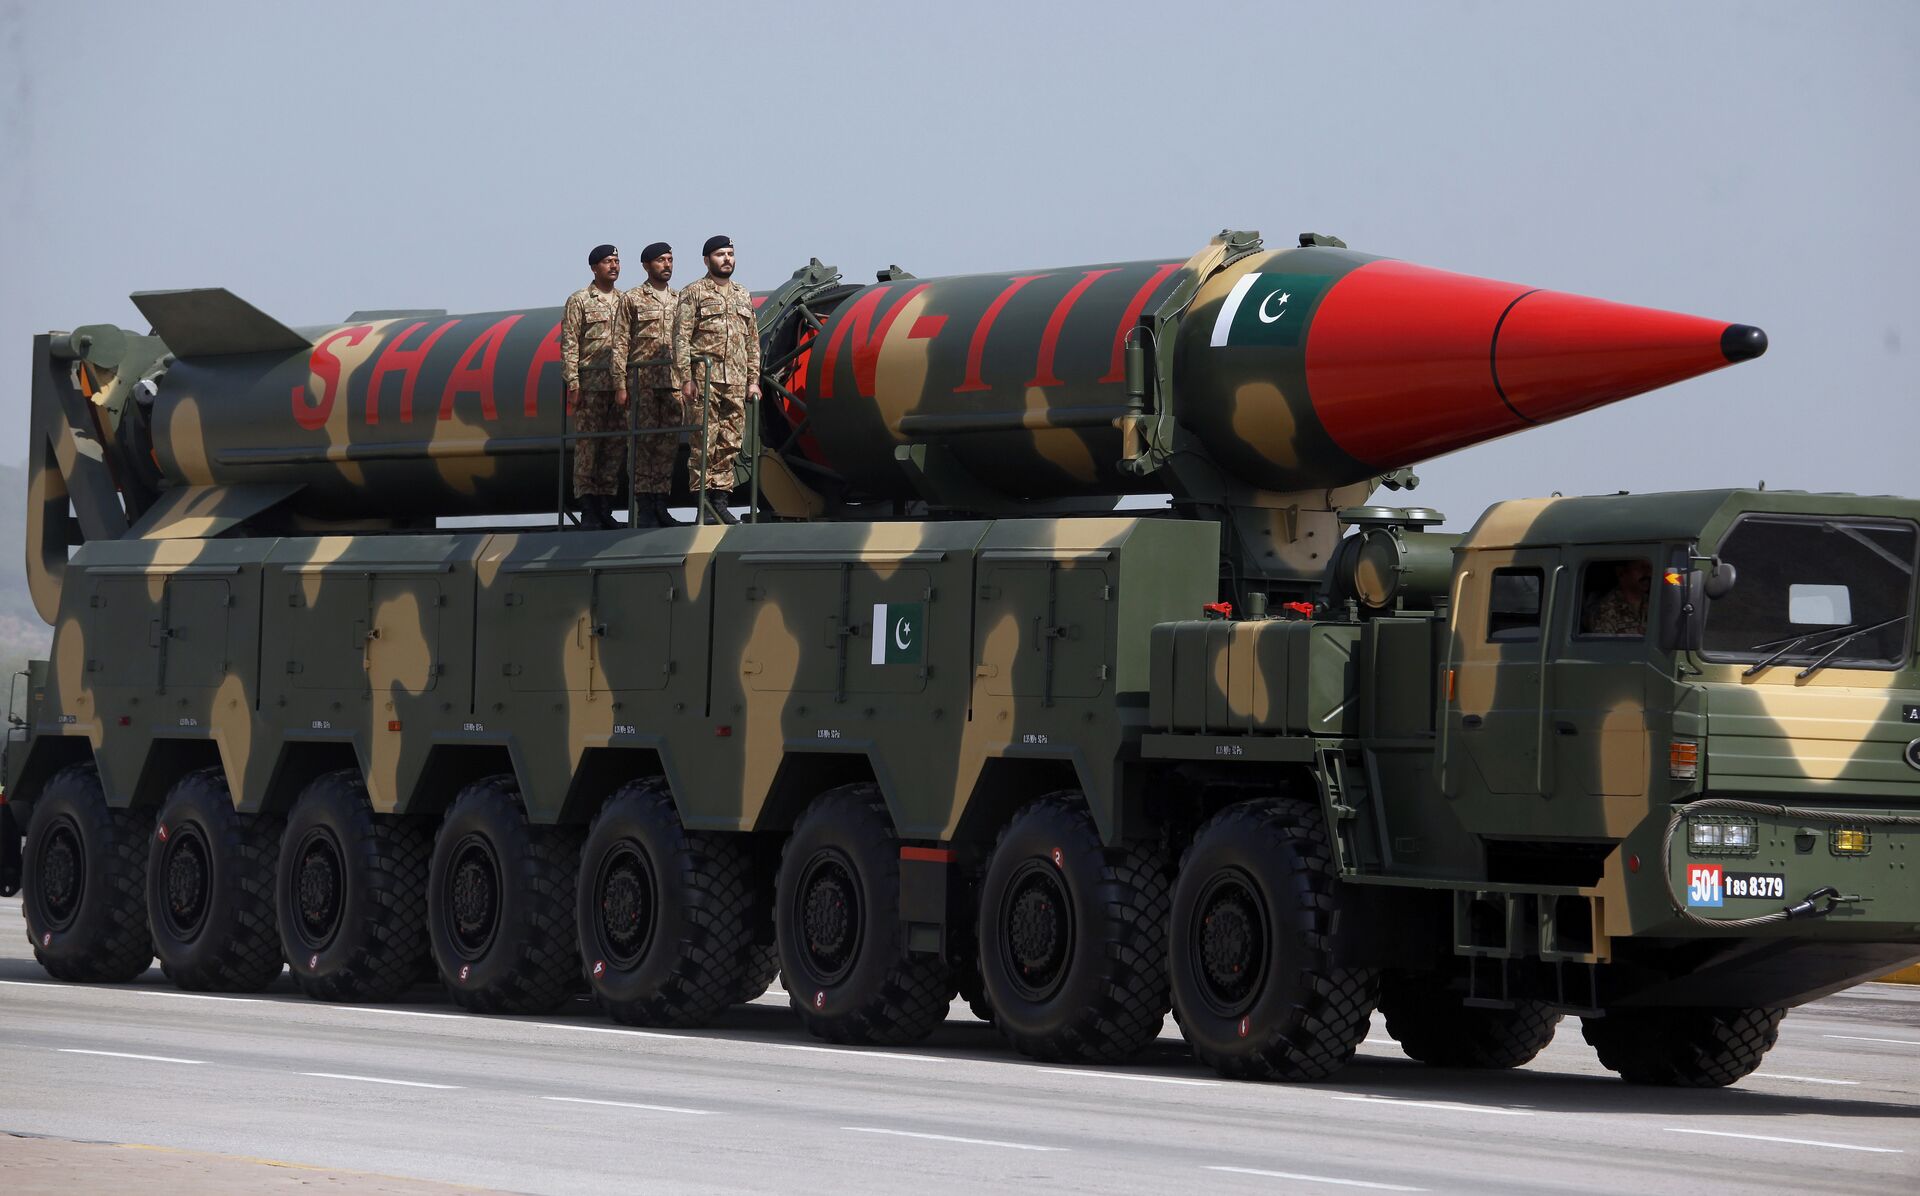 A Pakistani-made Shaheen-III missile, that is capable of carrying nuclear warheads, is on display during a military parade in Islamabad, Pakistan, Friday, March 23, 2018 - Sputnik International, 1920, 08.09.2021